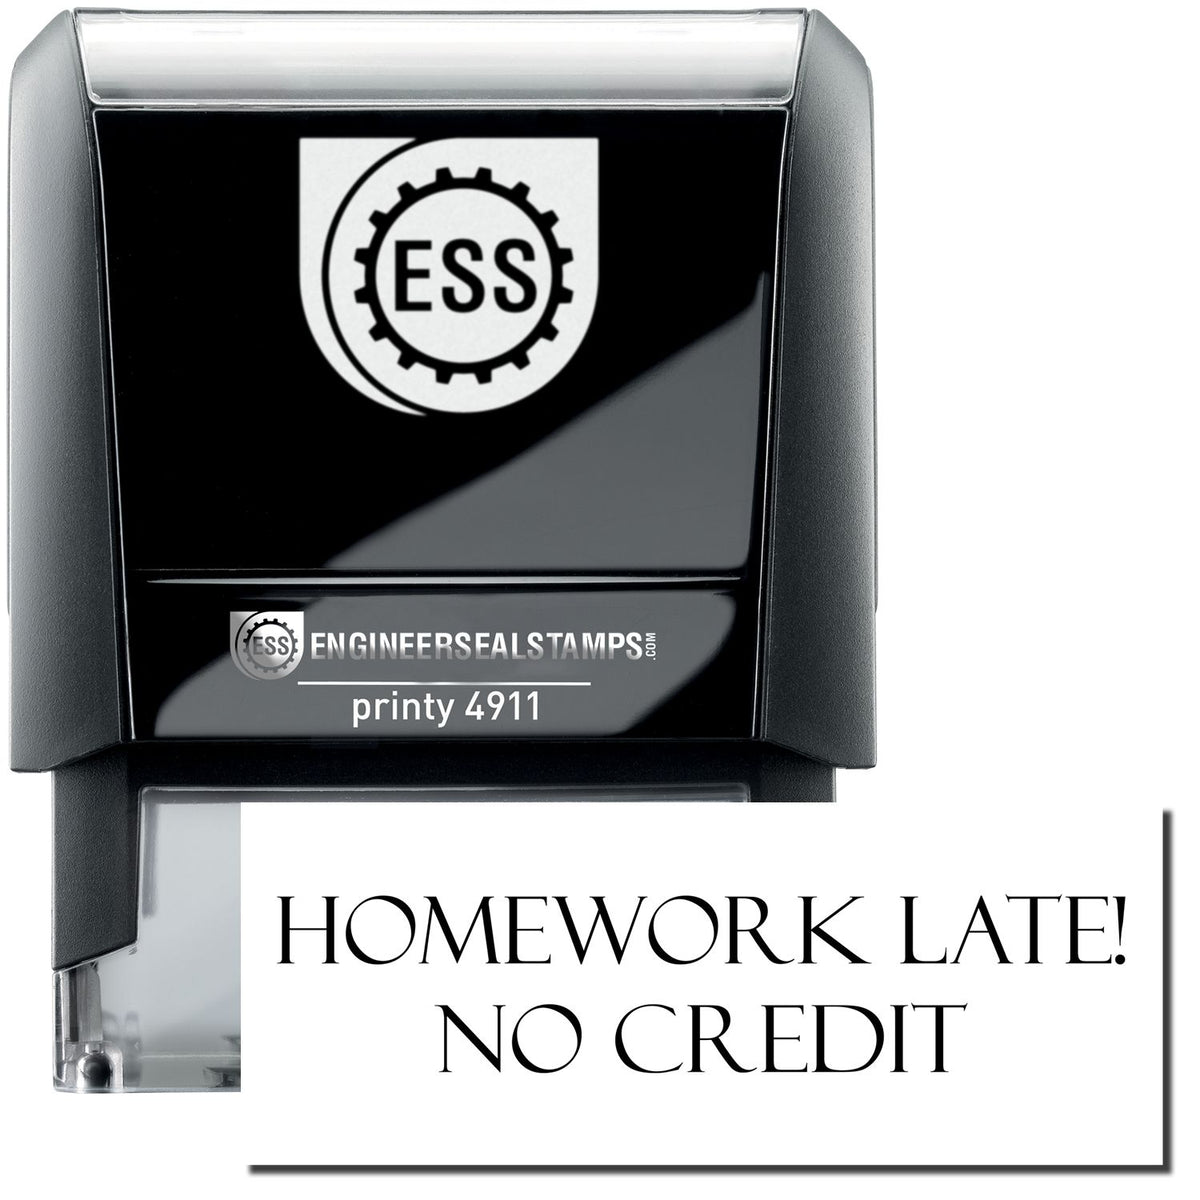 A self-inking stamp with a stamped image showing how the text &quot;HOMEWORK LATE! NO CREDIT&quot; is displayed after stamping.